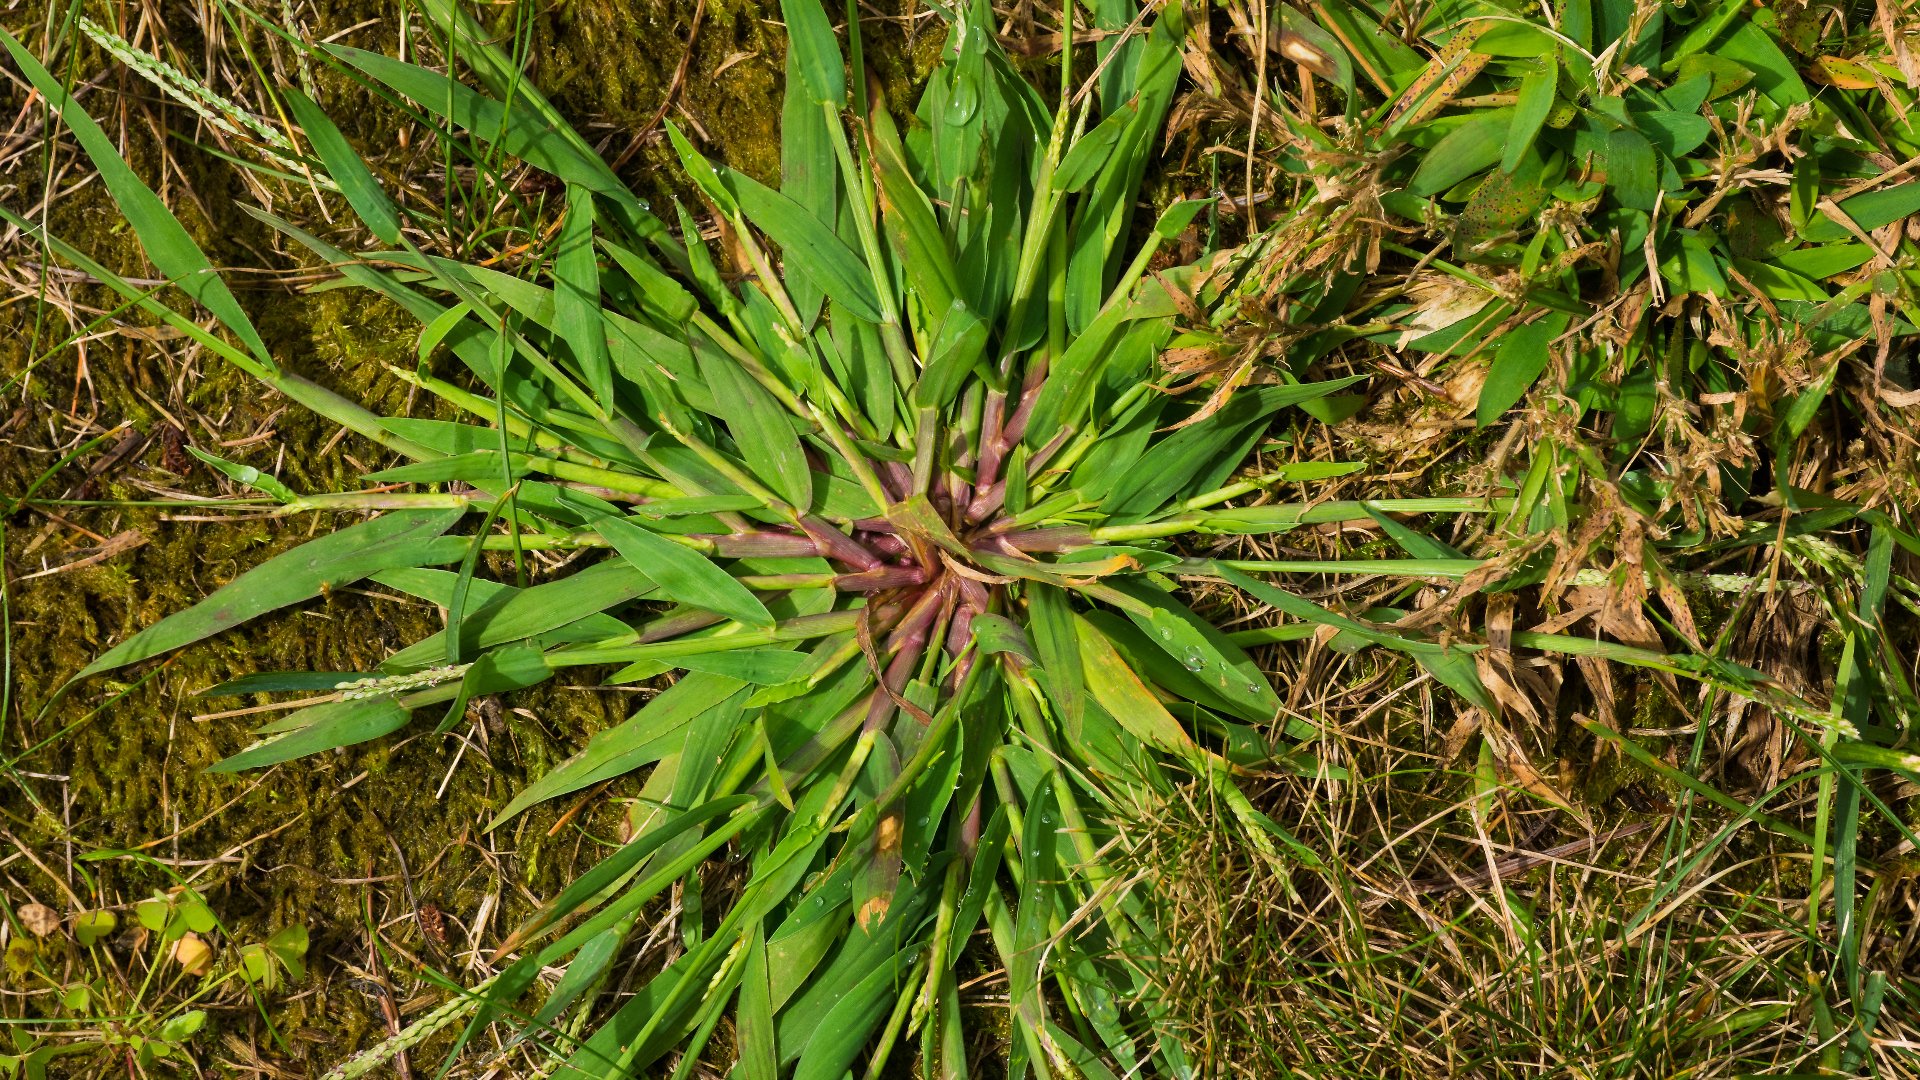 Crabgrass: What Does It Look Like & How Can You Prevent or Control It?